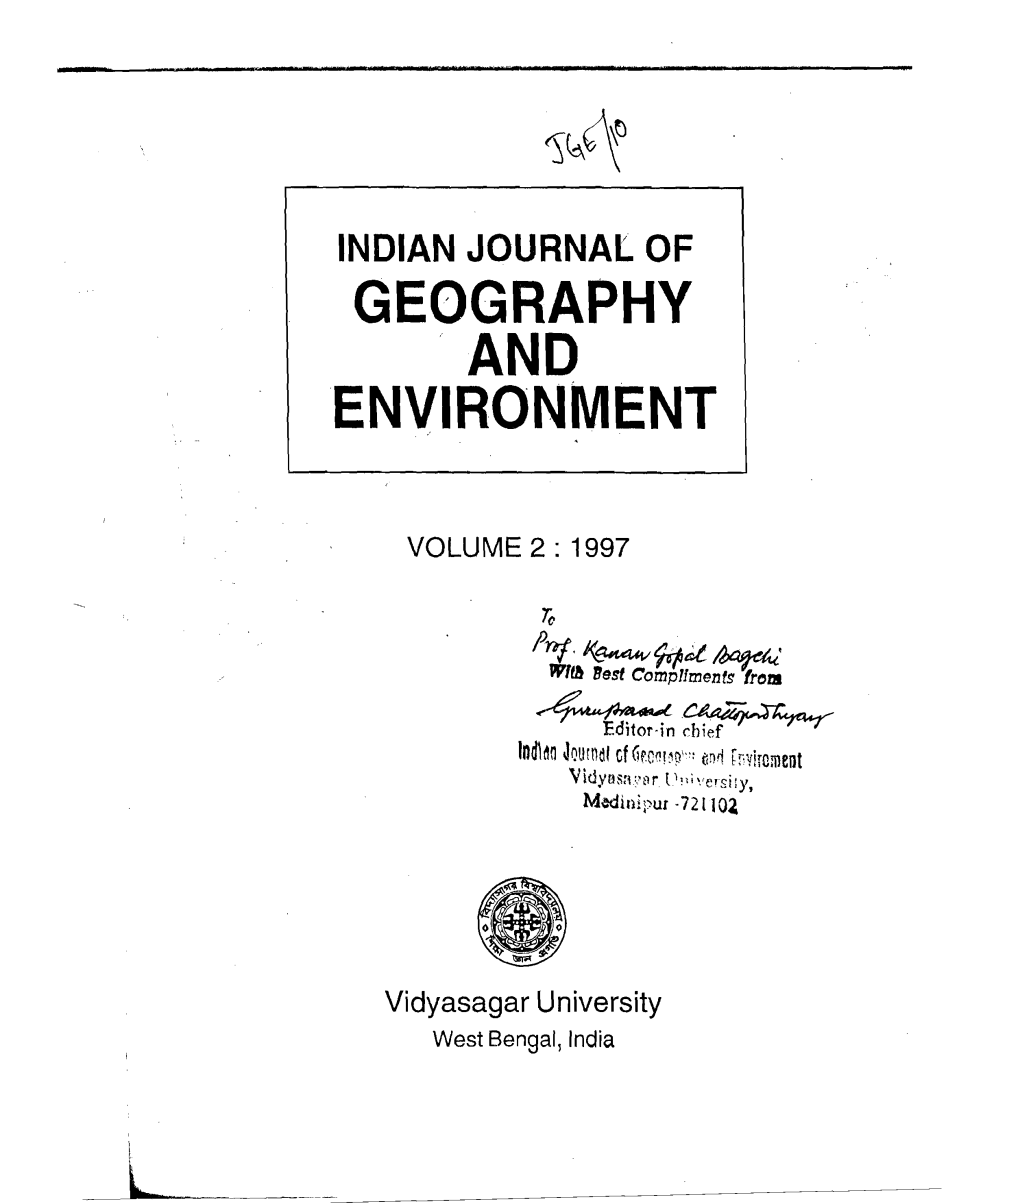 Geography and Environment